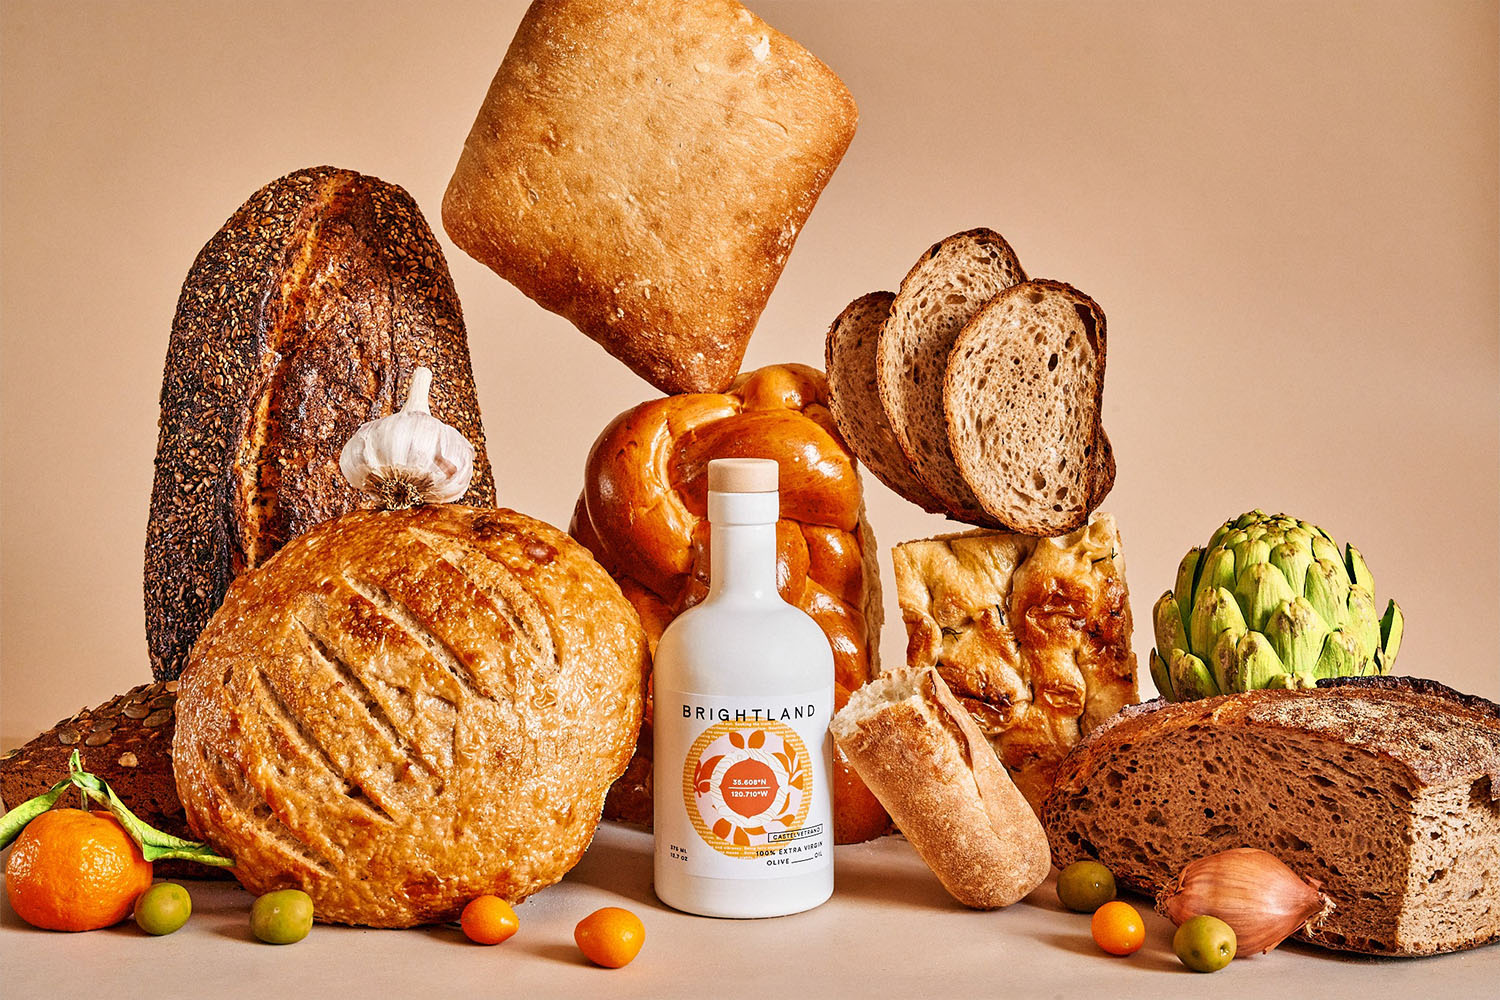 a bottle of bright land olive oil surrounded by loaves of bread